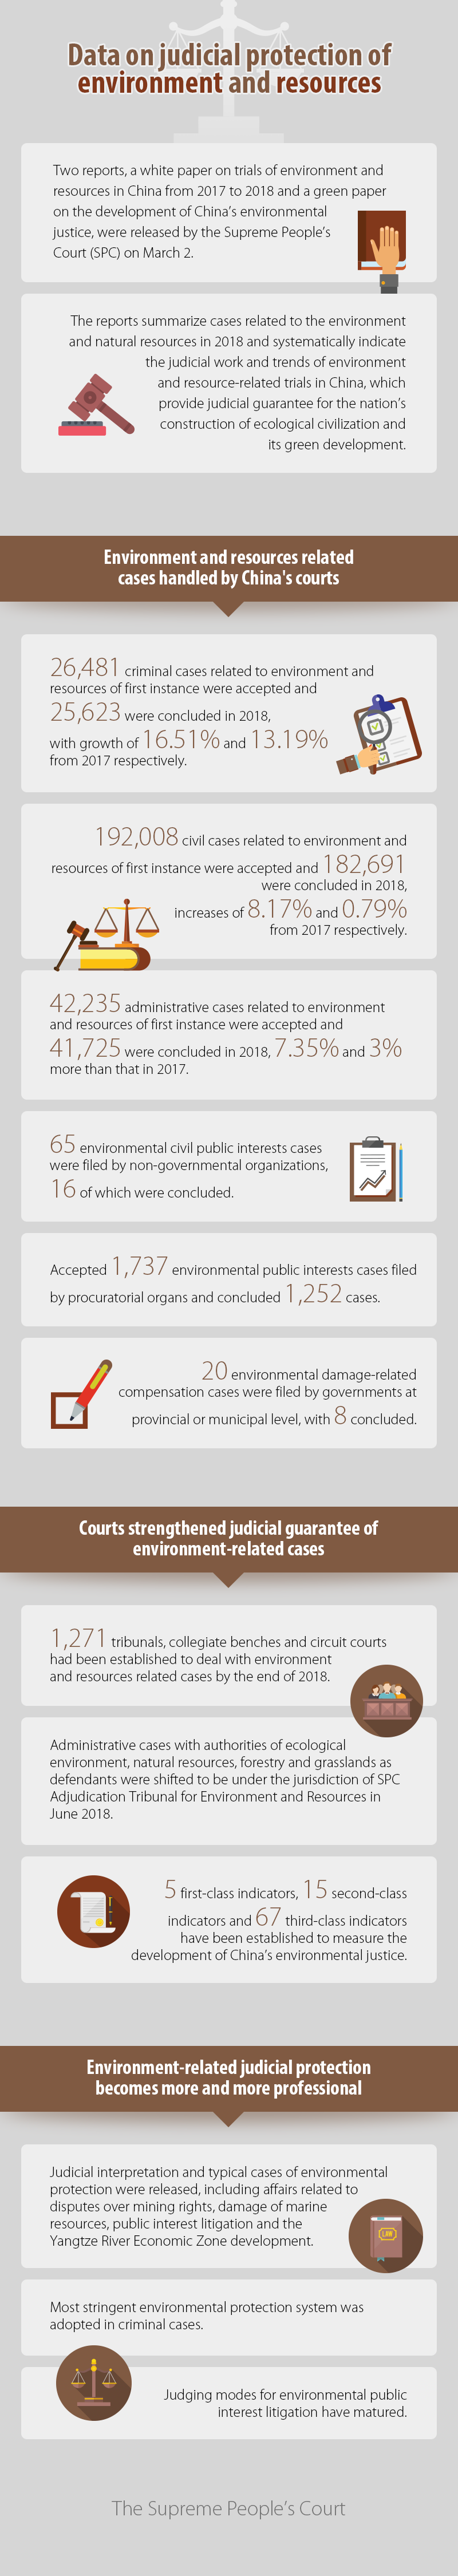 Data on judicial protection of environment and resources